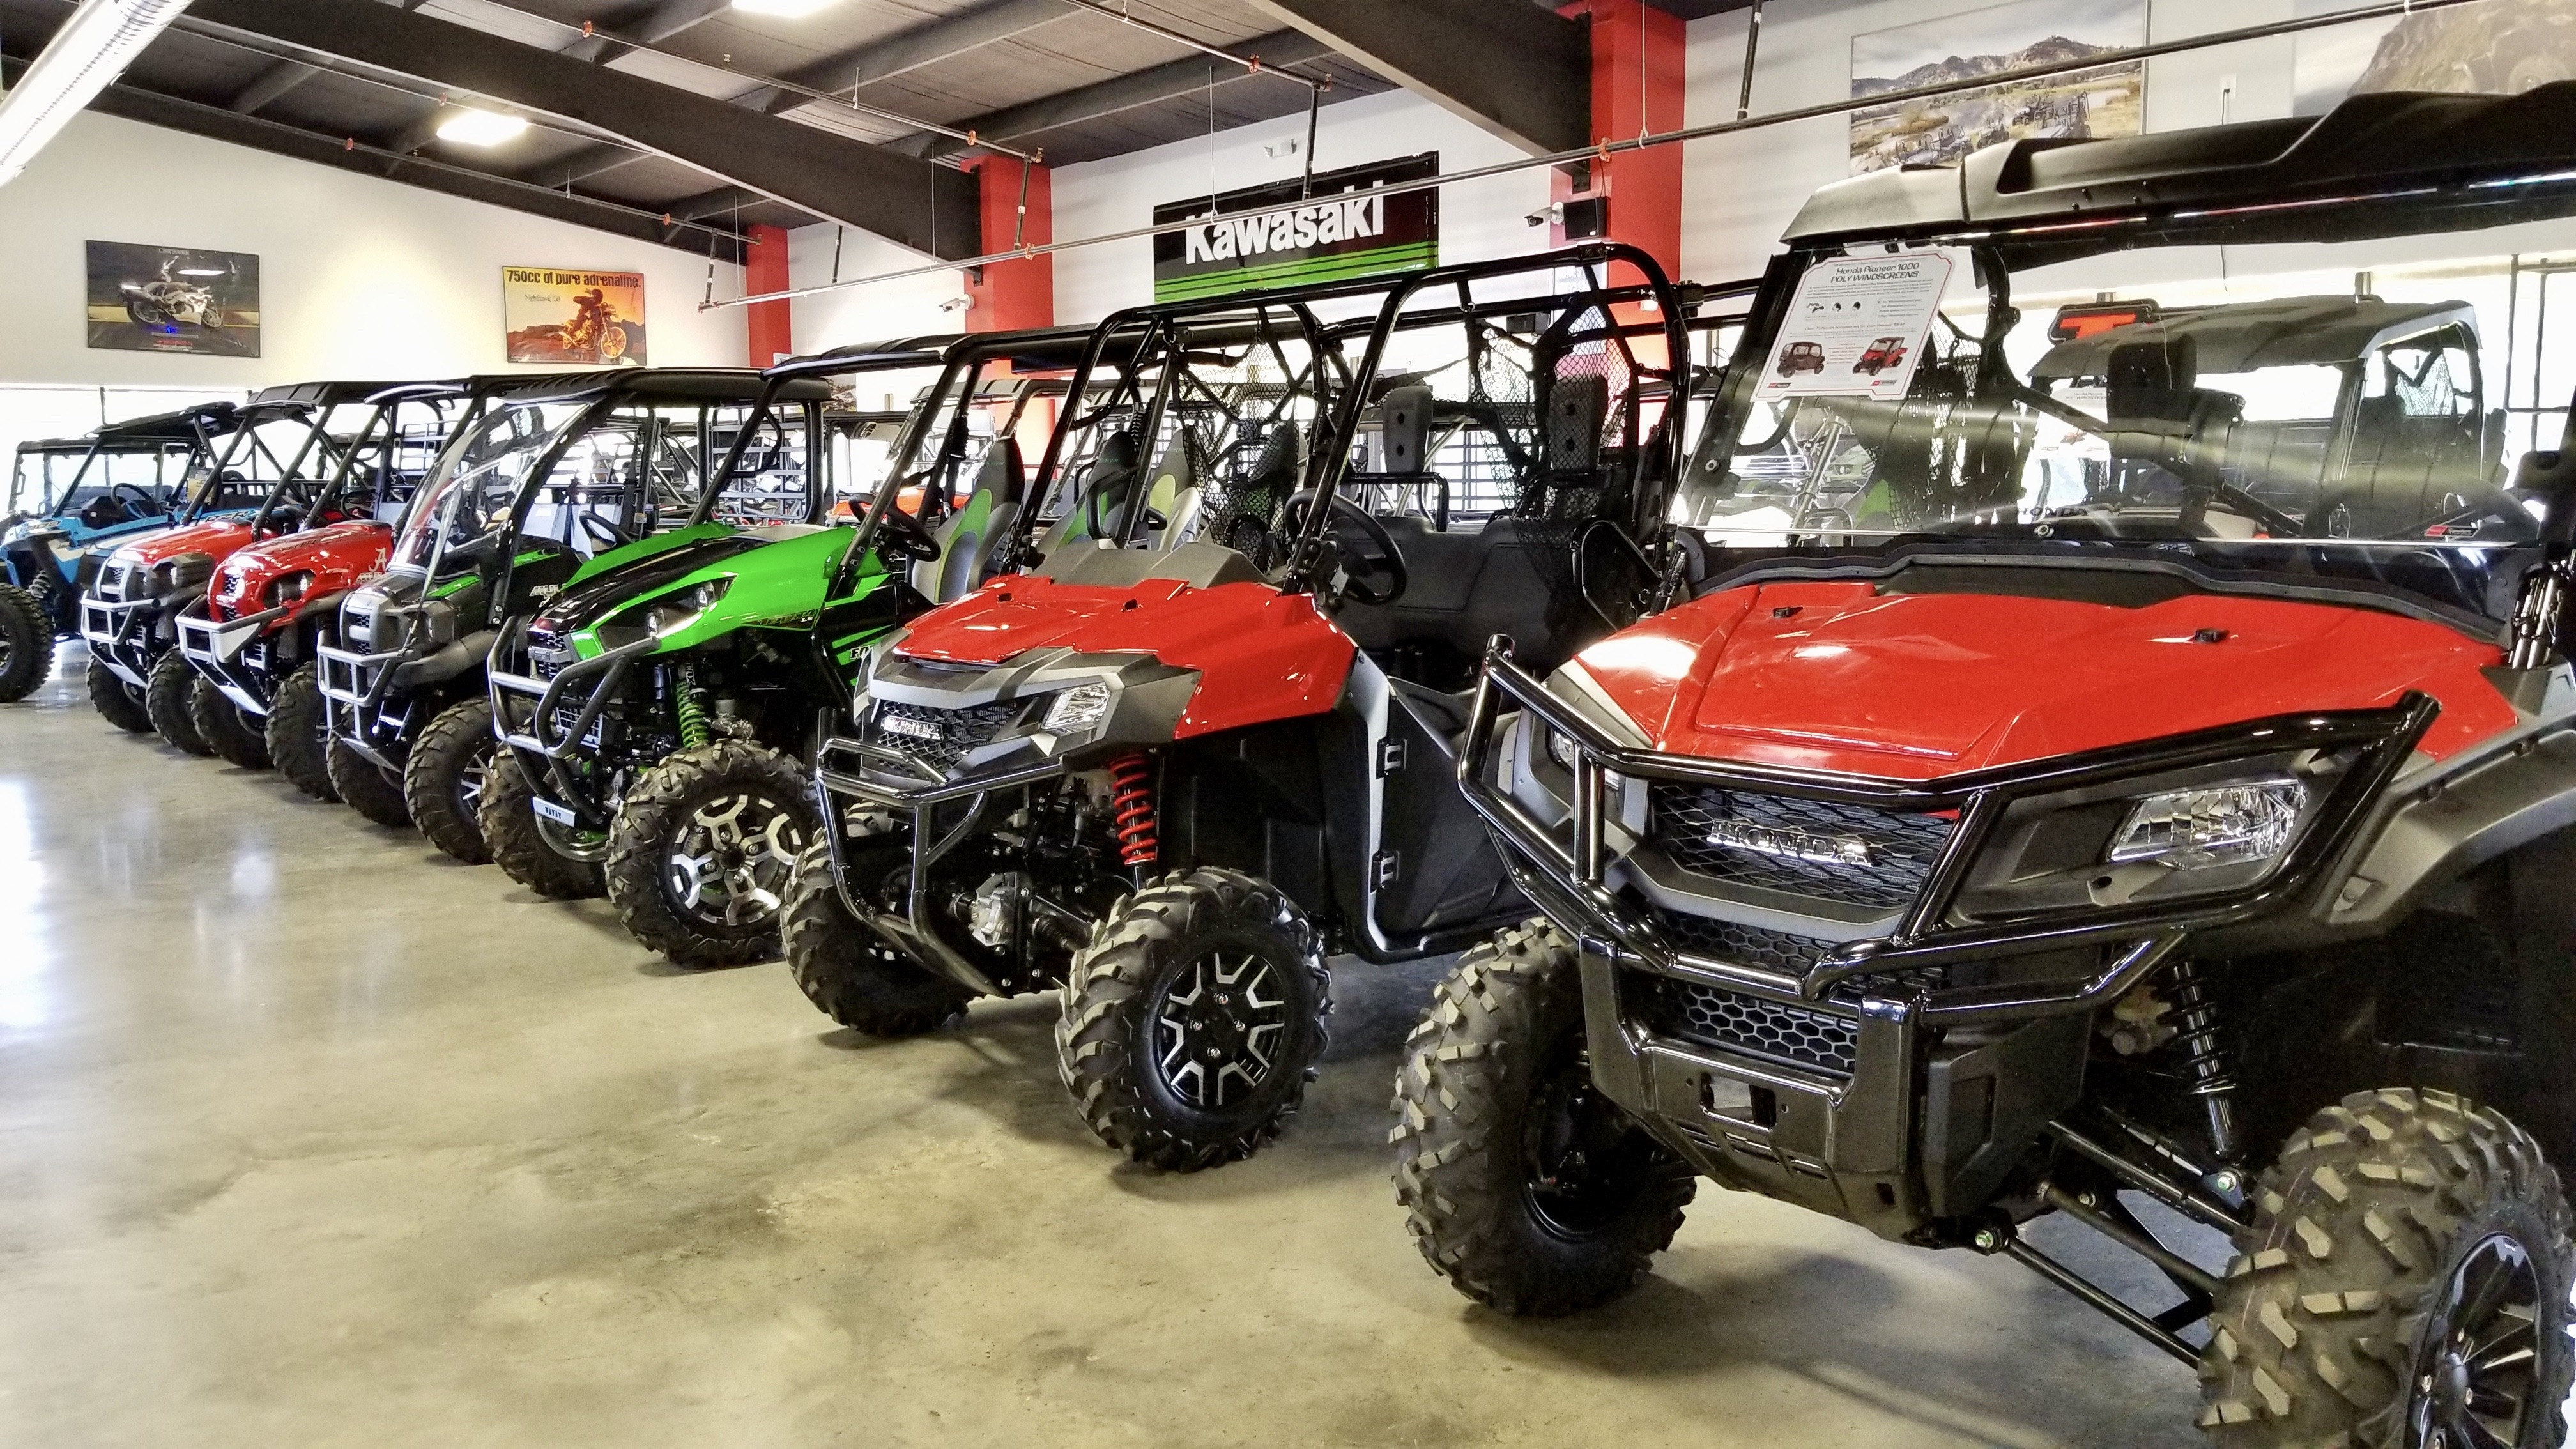 Shop UTVs and side by sides at Pinnacle Motorsports located in Bessemer, AL